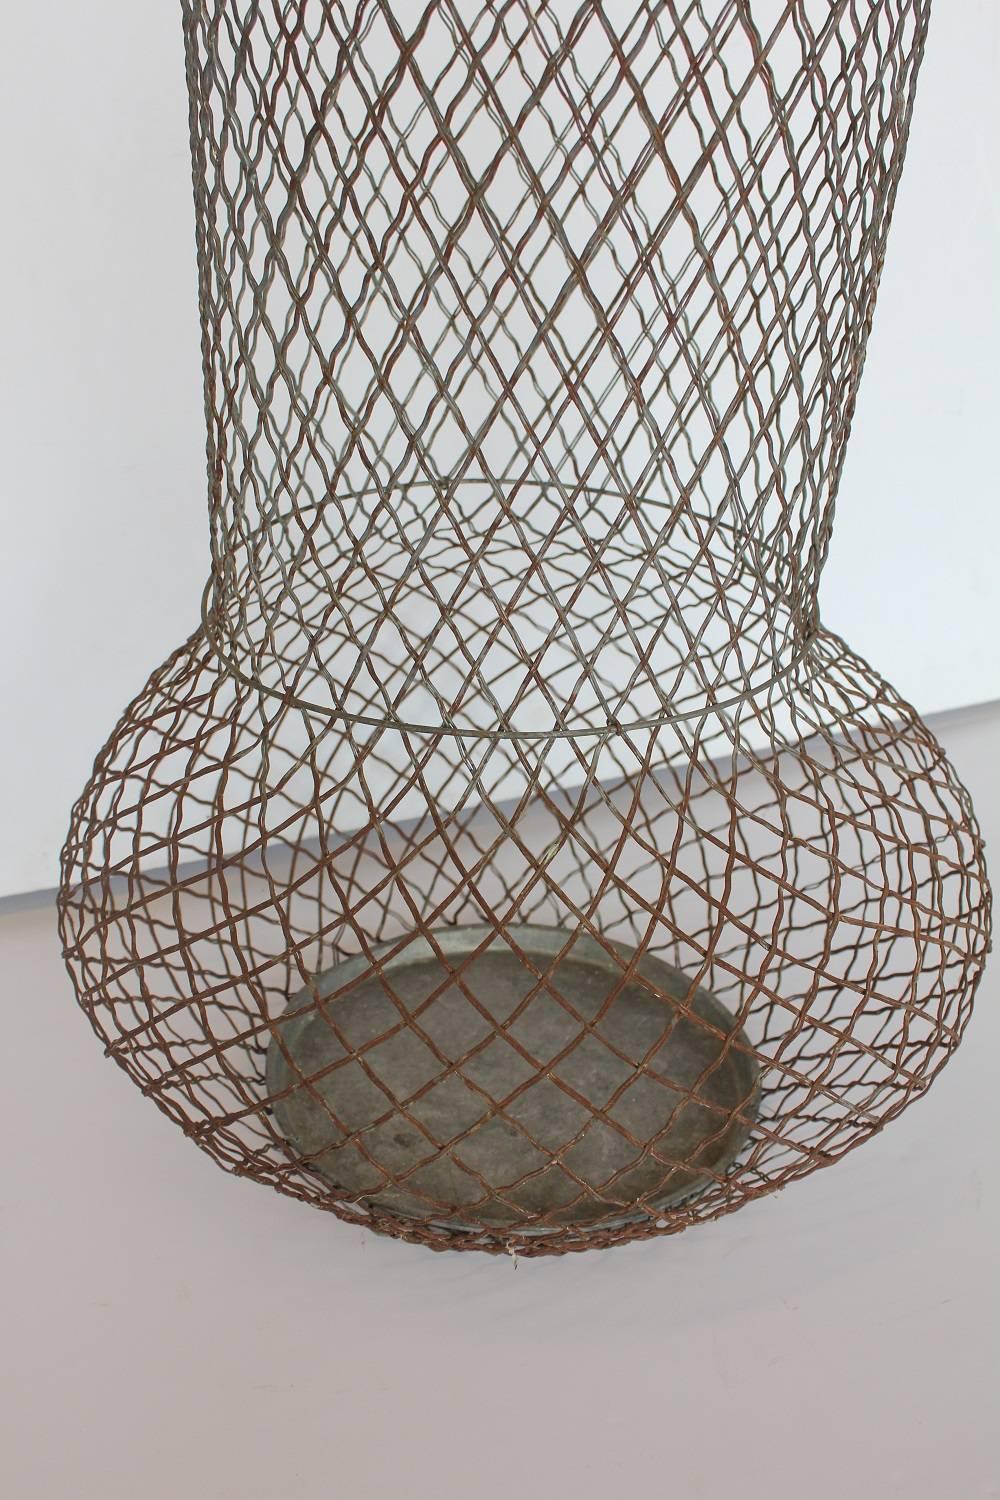 Early 1900s tall American wire urn or waste basket.